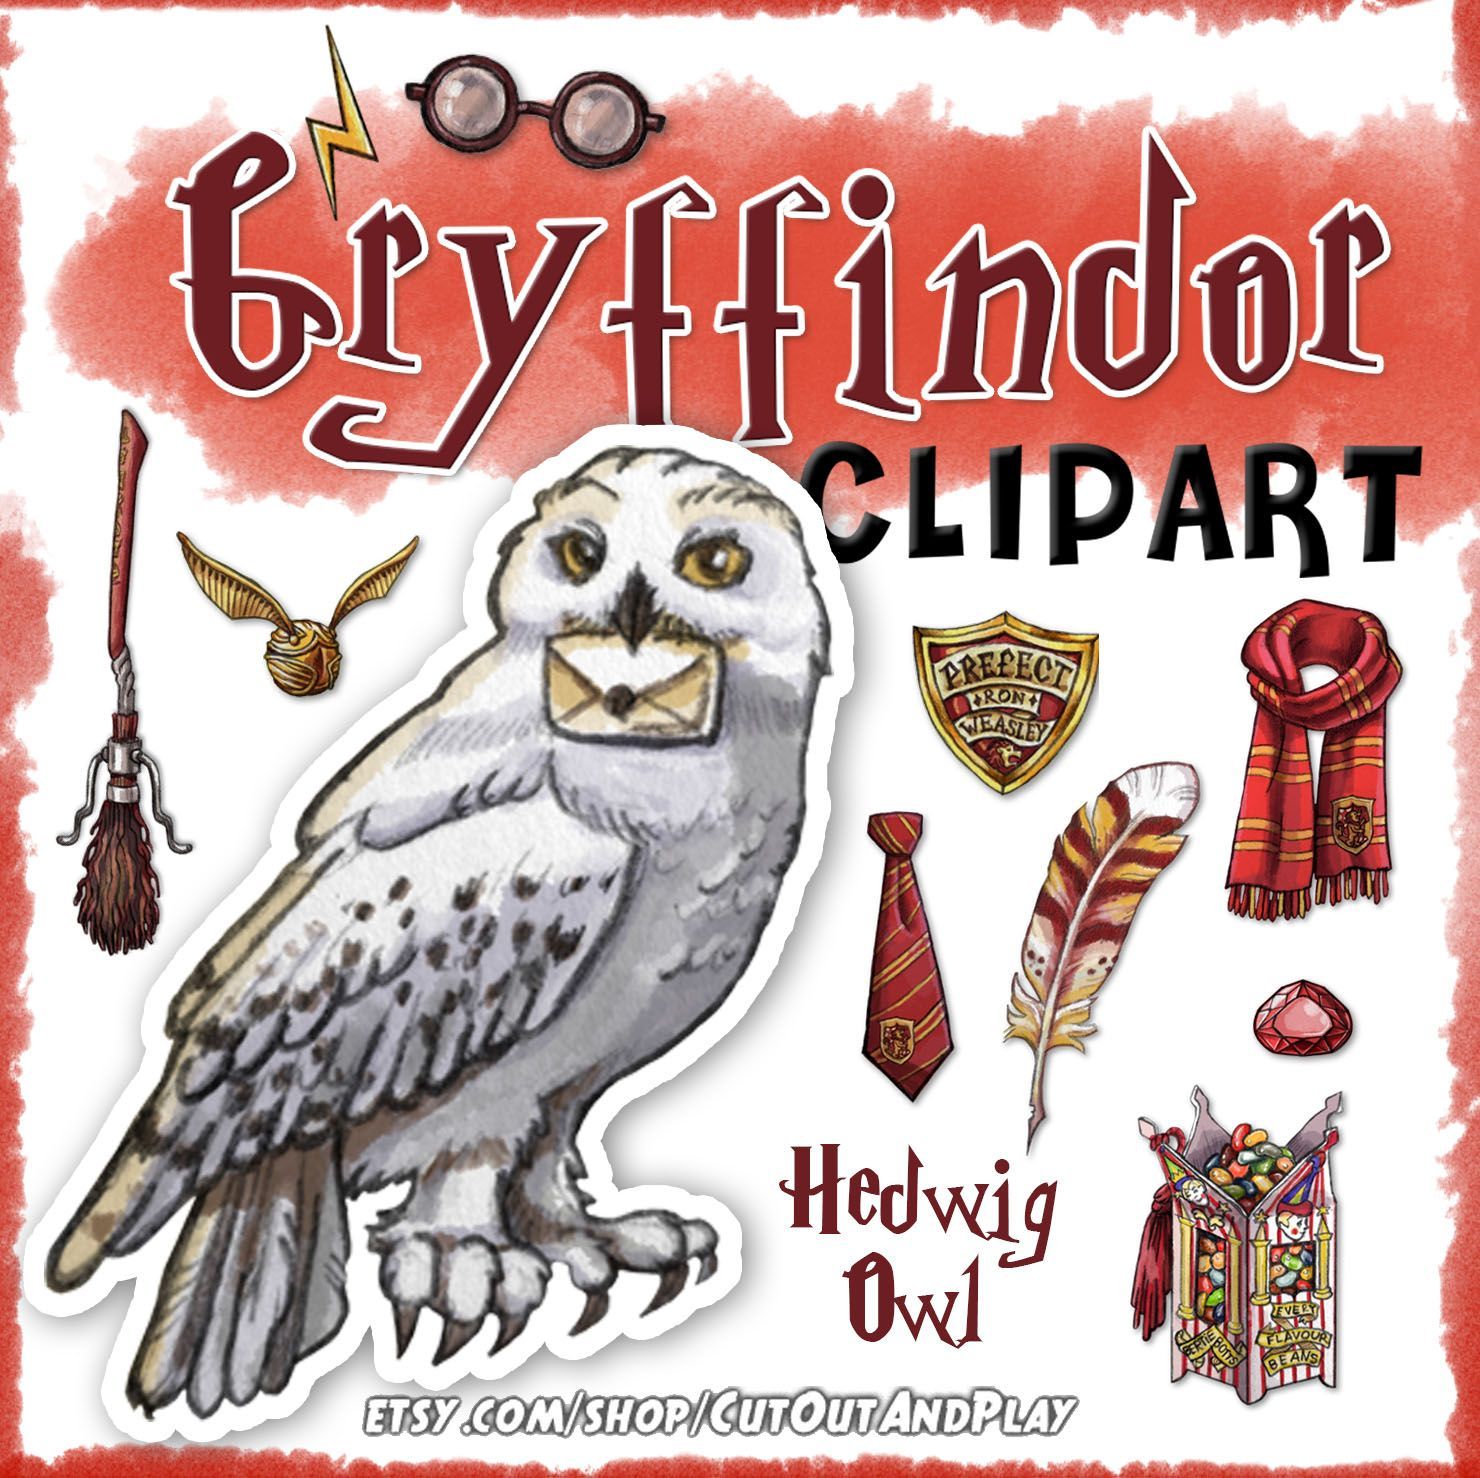 Gryffindor clipart, Harry Potter clipart, Harry potter party